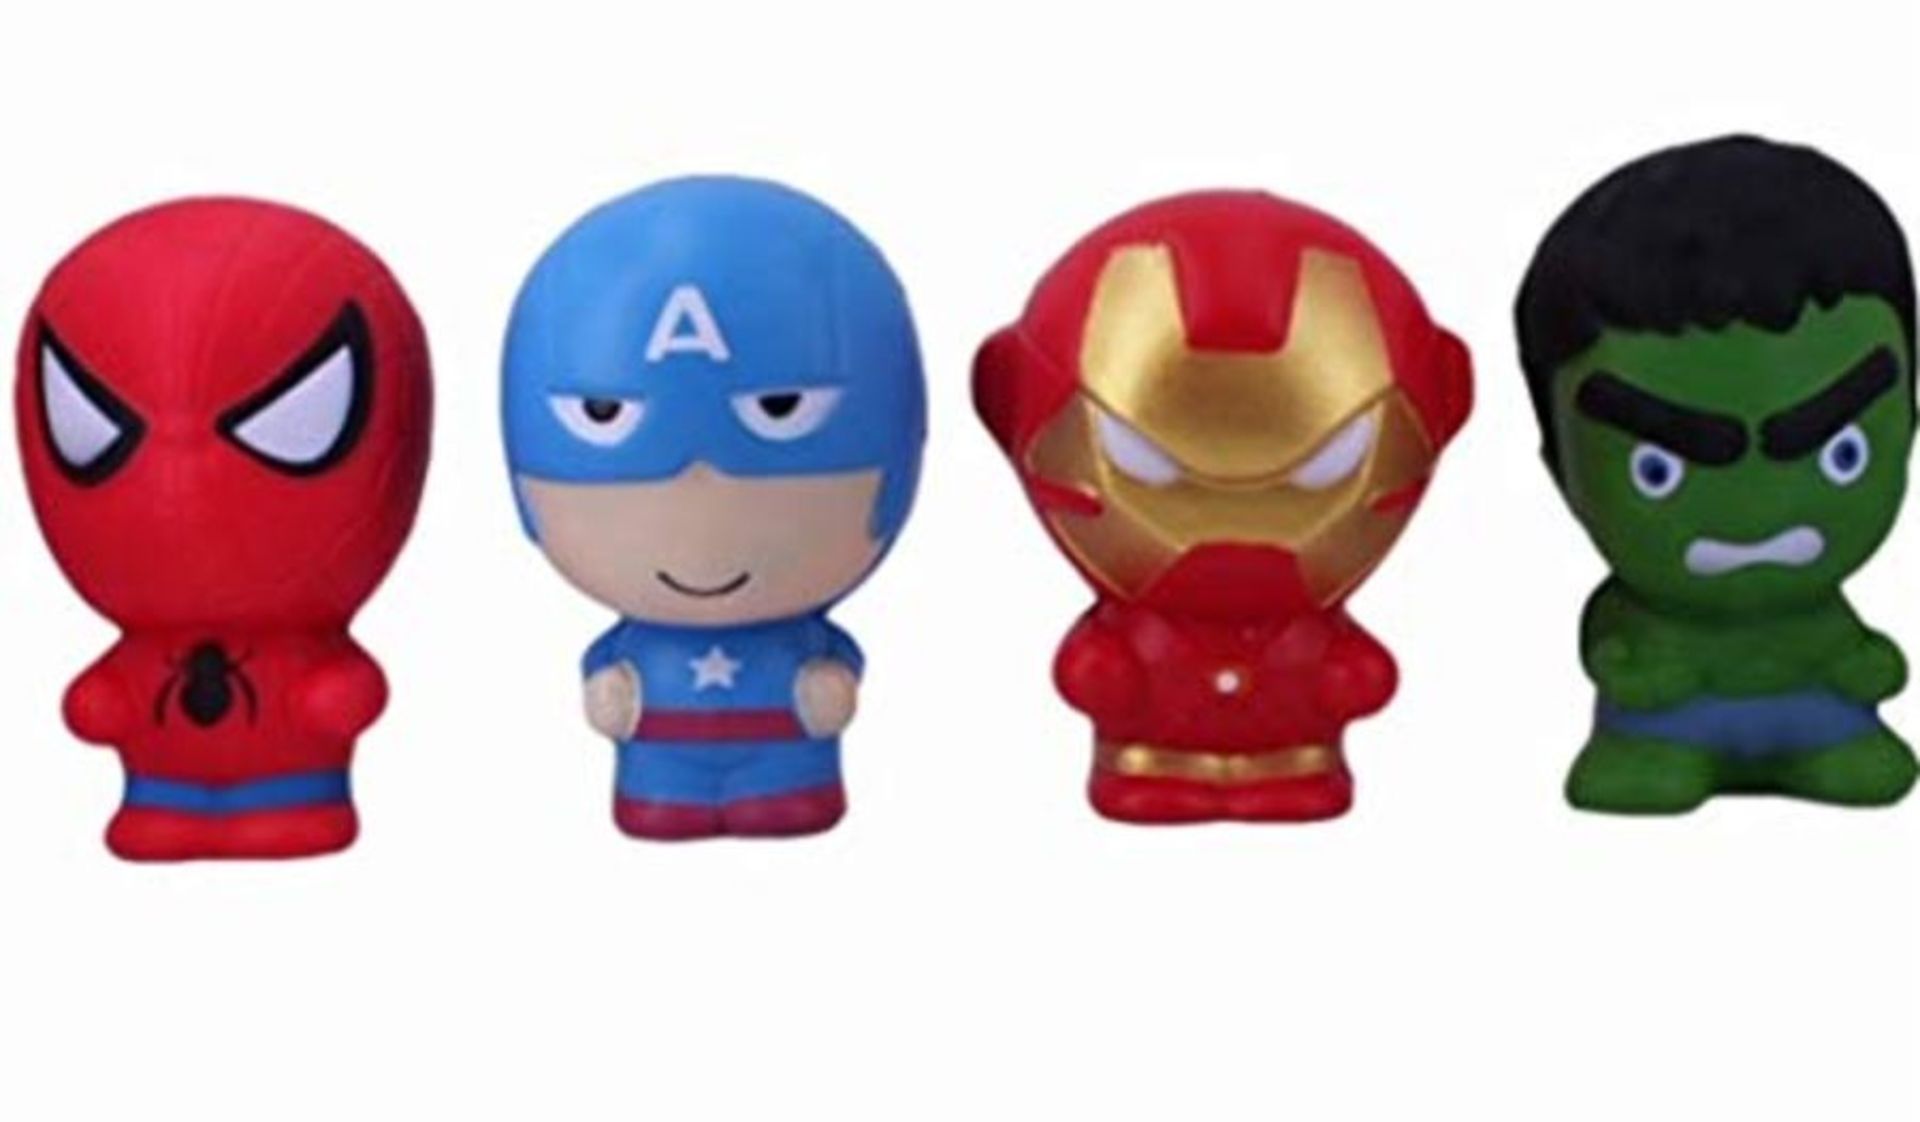 BKT Perform Marvel Superhero Toy Squishies Gift Film Characters Squishy 4 Pack Large S